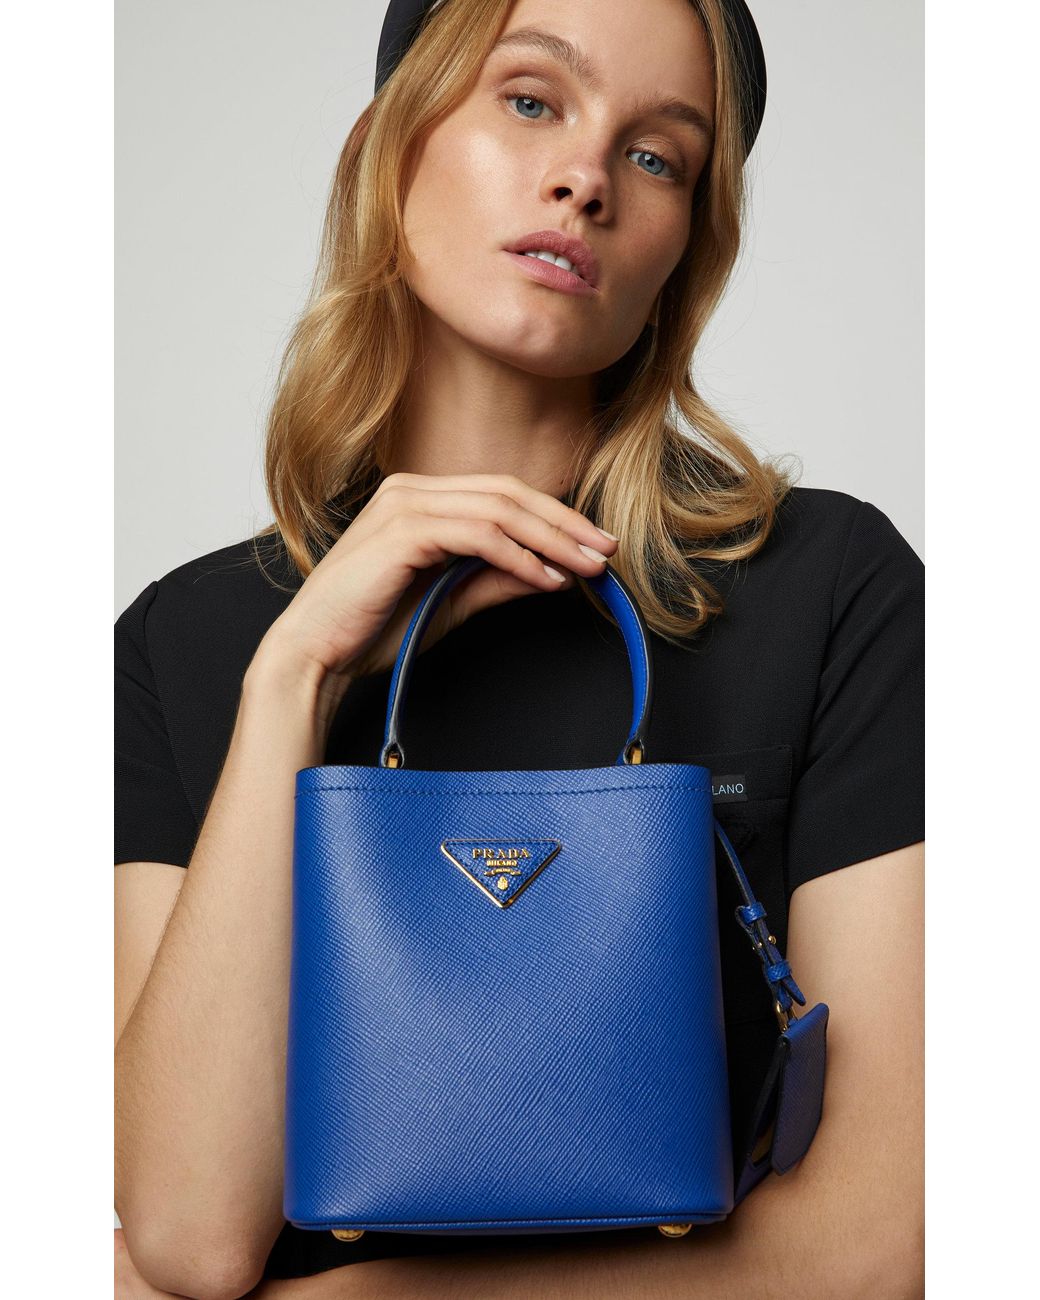 Prada Small Saffiano Leather Double Bucket Bag in Blue | Lyst